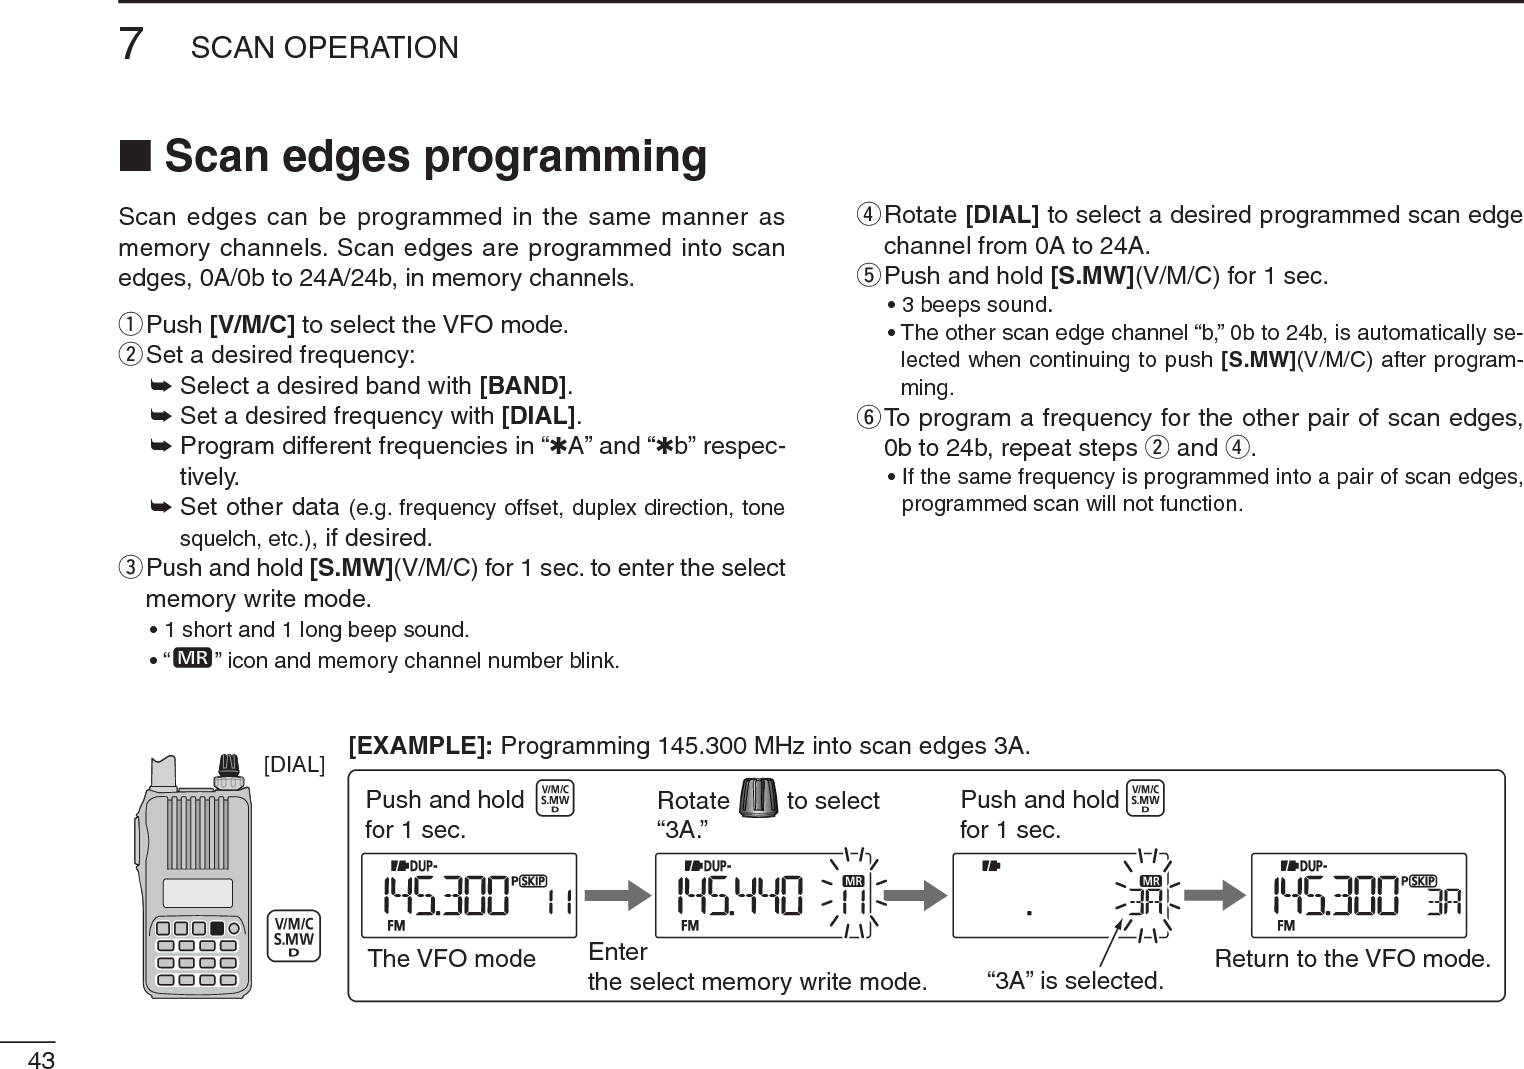 437SCAN OPERATIONN Scan edges programmingScan edges can be programmed in the same manner as memory channels. Scan edges are programmed into scan edges, 0A/0b to 24A/24b, in memory channels.qPush [V/M/C] to select the VFO mode.wSet a desired frequency:± Select a desired band with [BAND].± Set a desired frequency with [DIAL].±Program different frequencies in “1A” and “1b” respec-tively.±Set other data (e.g. frequency offset, duplex direction, tone squelch, etc.), if desired.e  Push and hold [S.MW](V/M/C) for 1 sec. to enter the select memory write mode.• 1 short and 1 long beep sound.•“ ” icon and memory channel number blink.r  Rotate [DIAL] to select a desired programmed scan edge channel from 0A to 24A.tPush and hold [S.MW](V/M/C) for 1 sec.• 3 beeps sound.• The other scan edge channel “b,” 0b to 24b, is automatically se-lected when continuing to push [S.MW](V/M/C) after program-ming.y  To program a frequency for the other pair of scan edges, 0b to 24b, repeat steps w and r.• If the same frequency is programmed into a pair of scan edges, programmed scan will not function.[DIAL]The VFO mode Enterthe select memory write mode.to selectRotatePush and holdfor 1 sec. “3A.”“3A” is selected. Return to the VFO mode.Push and holdfor 1 sec.[EXAMPLE]: Programming 145.300 MHz into scan edges 3A.